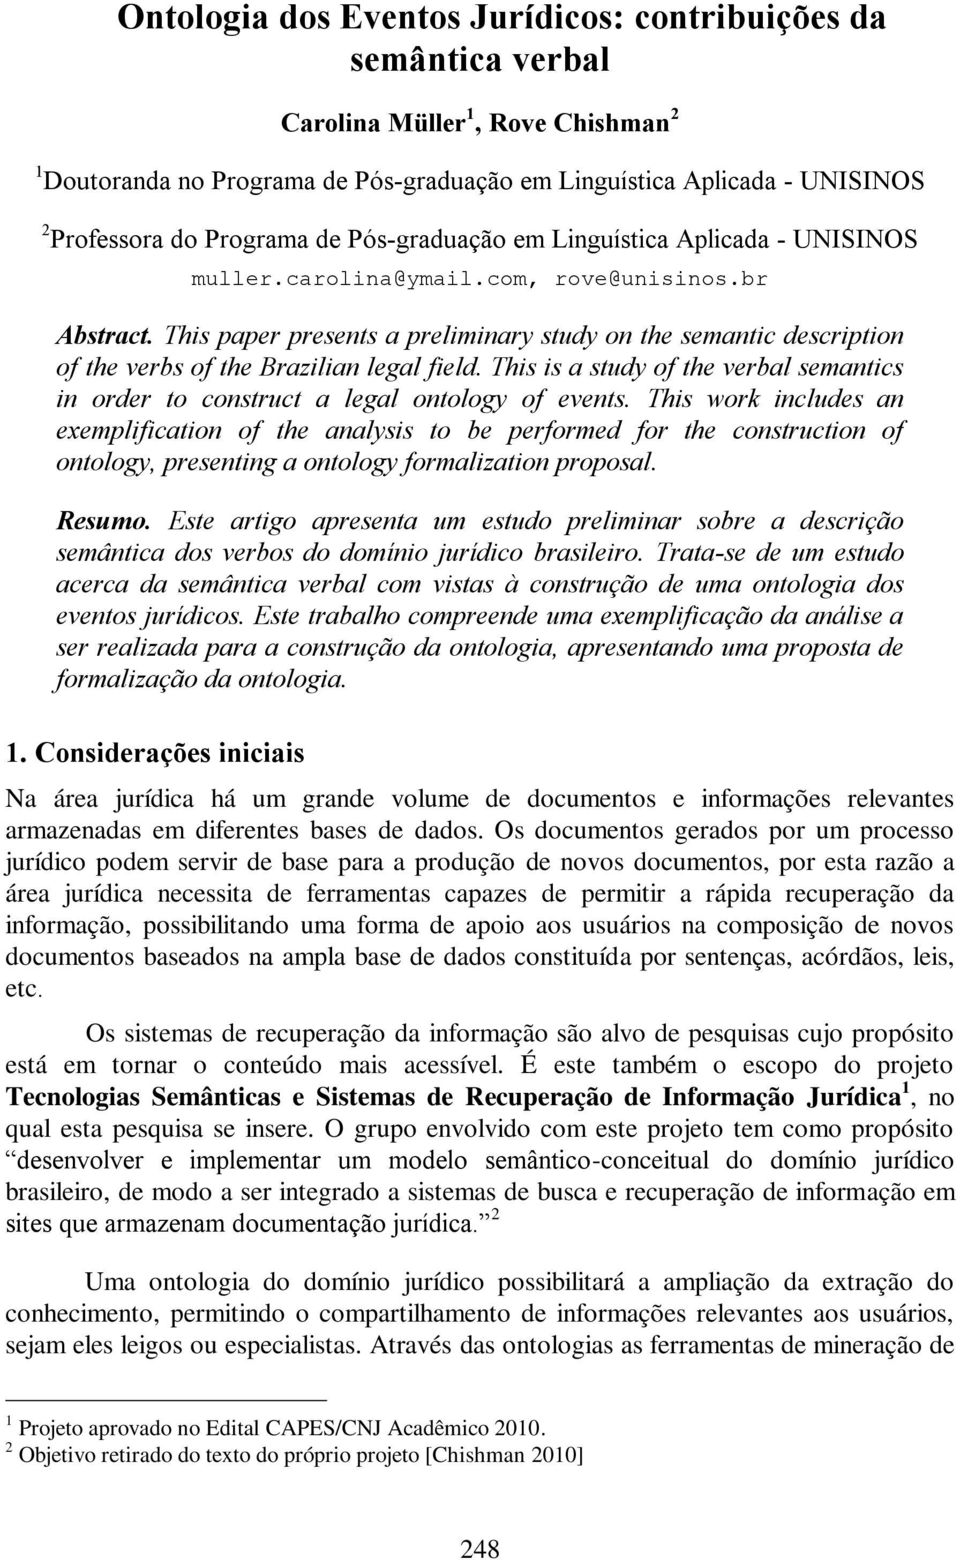 This paper presents a preliminary study on the semantic description of the verbs of the Brazilian legal field. This is a study of the verbal semantics in order to construct a legal ontology of events.